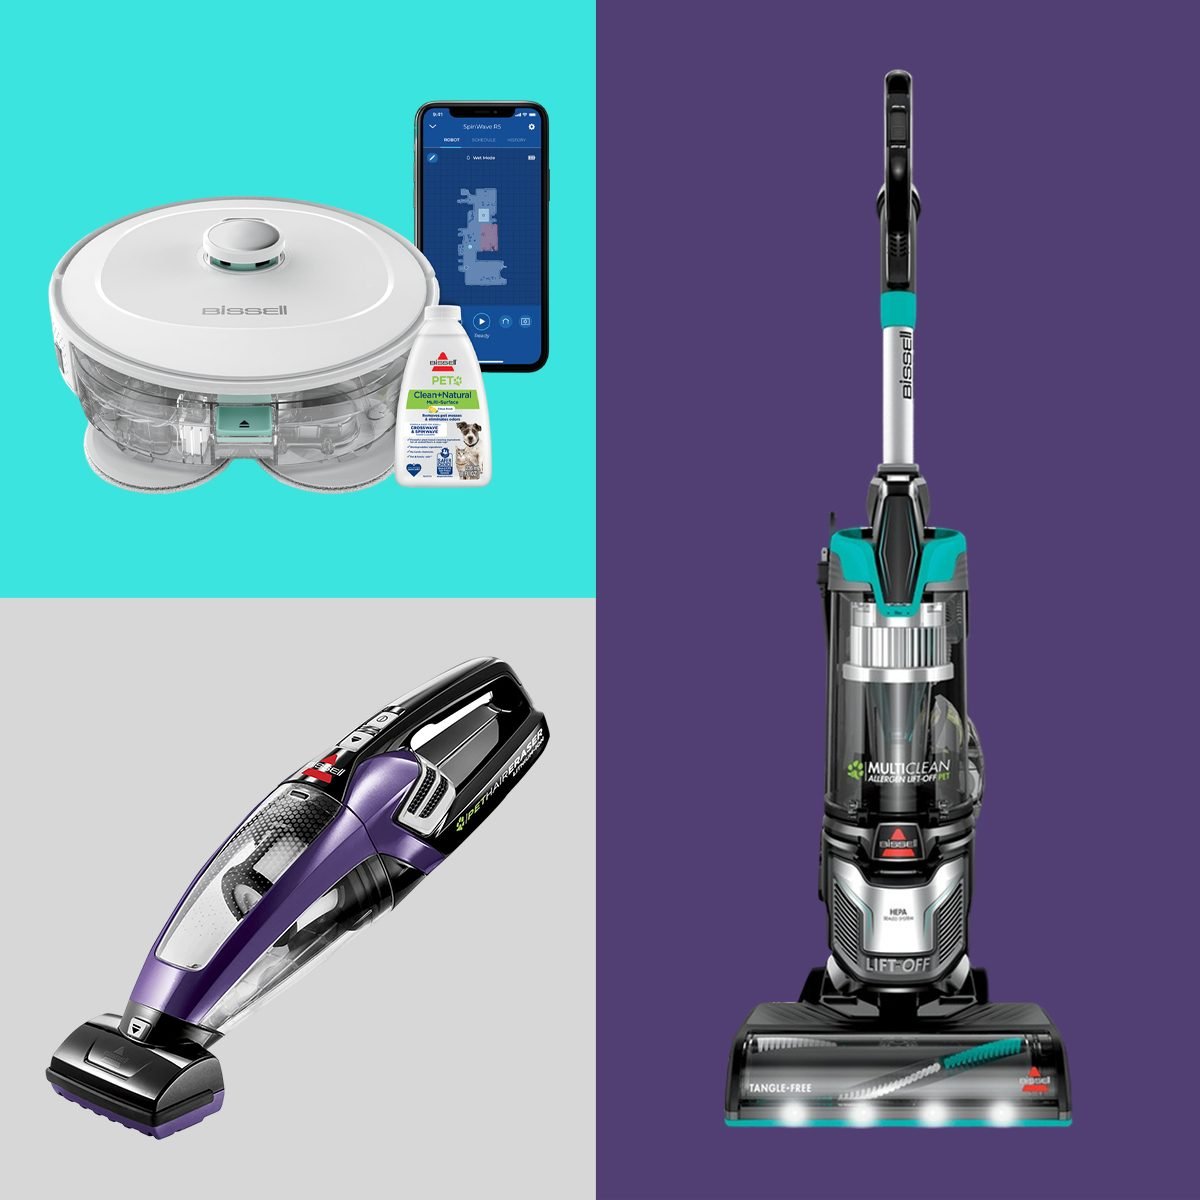 The Best Handheld Vacuums - Tested by Bob Vila